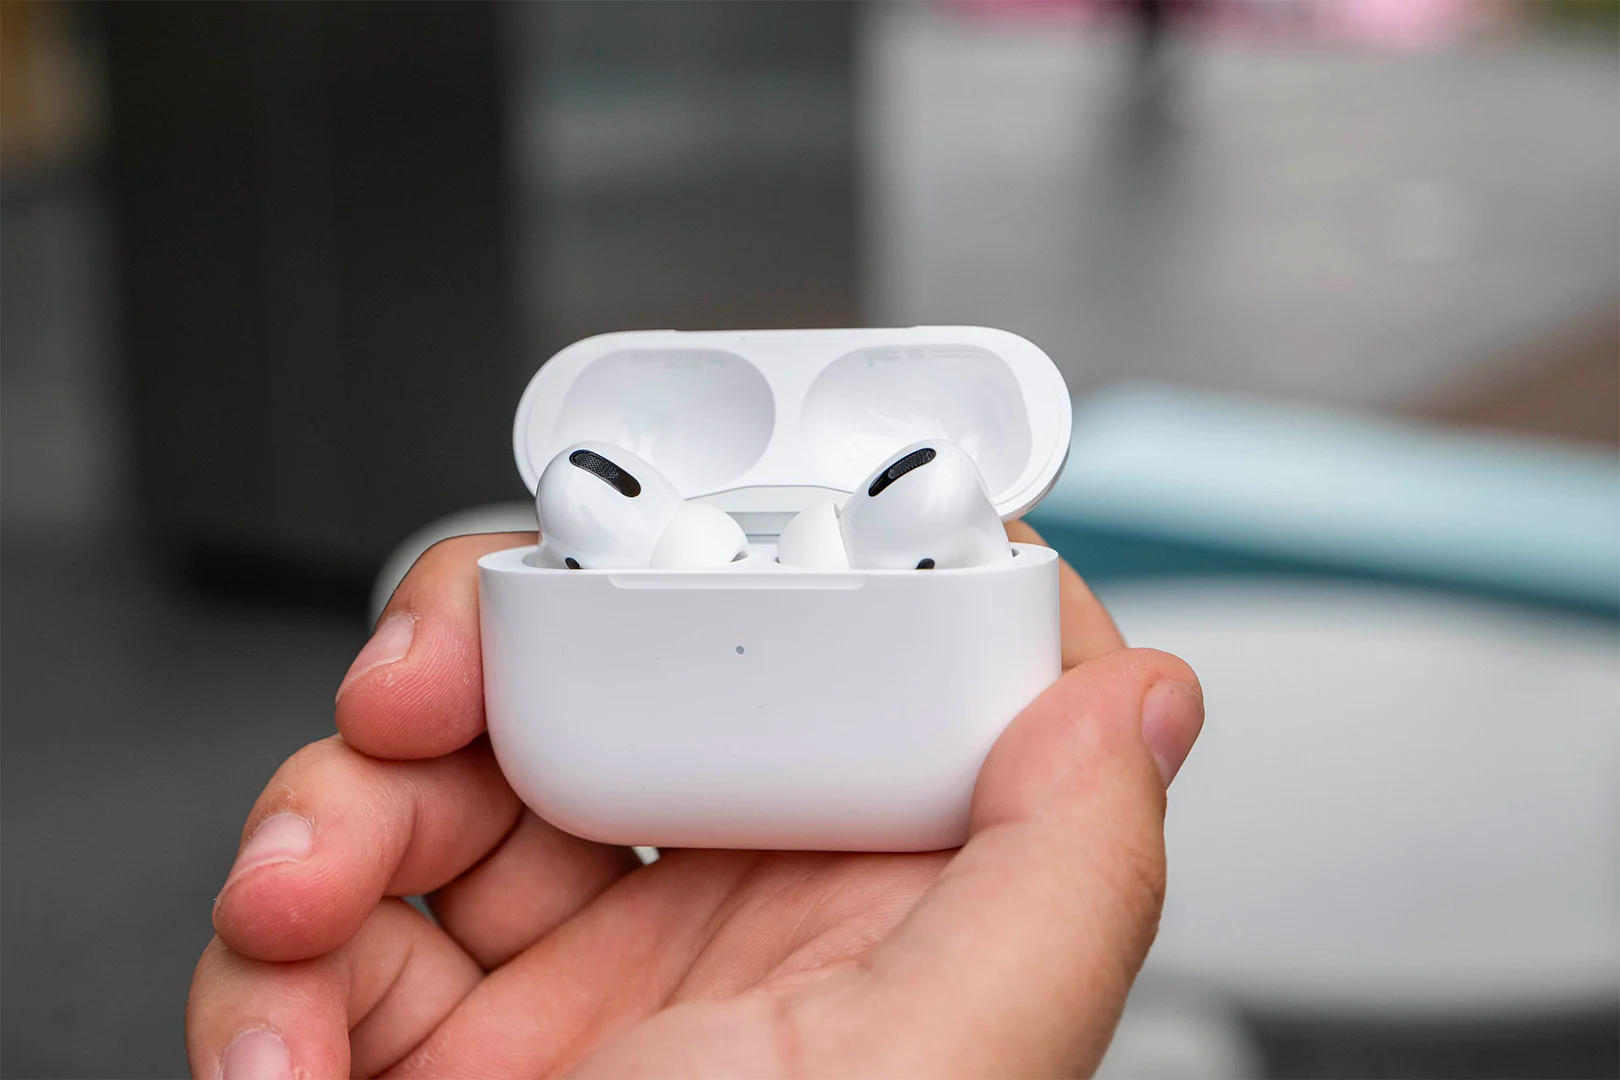 Purchase Protection: How I Lost 2 Pairs of AirPods and Got Both Fully Reimbursed